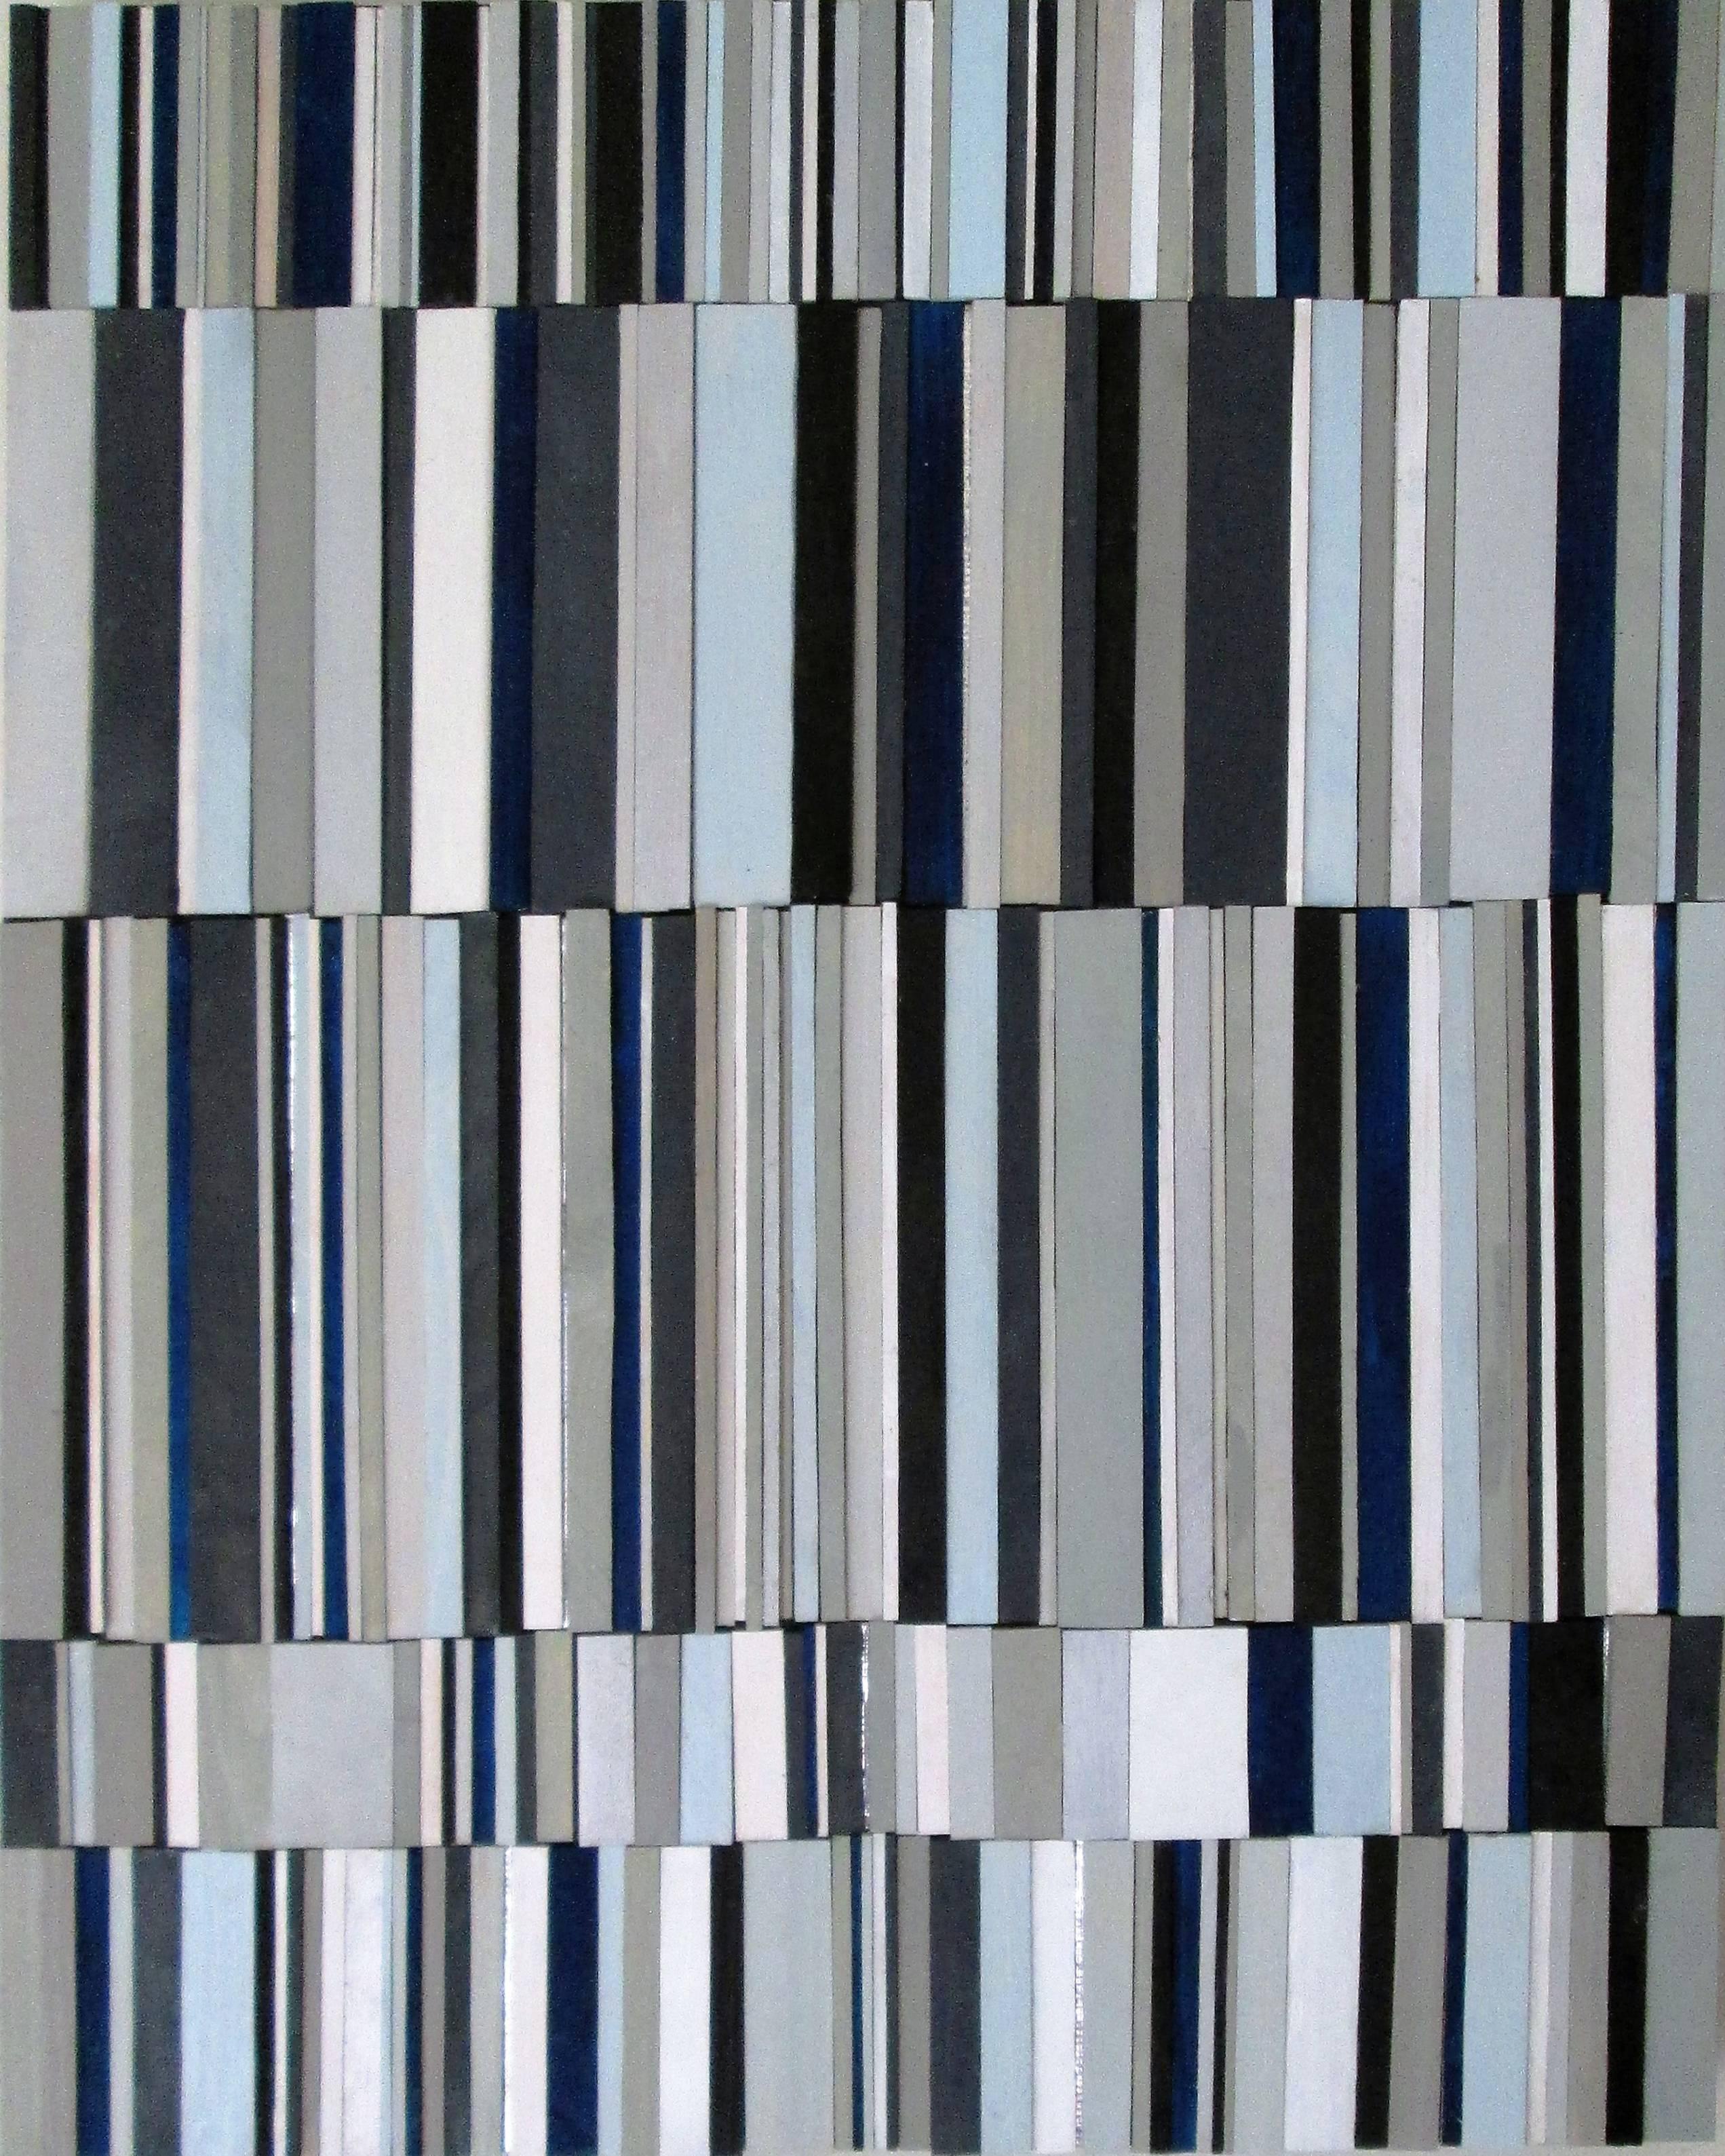 Stephen Walling Abstract Sculpture - Syncopation, Variation I (Graphic Blue White and Gray 3D Wall Sculpture)